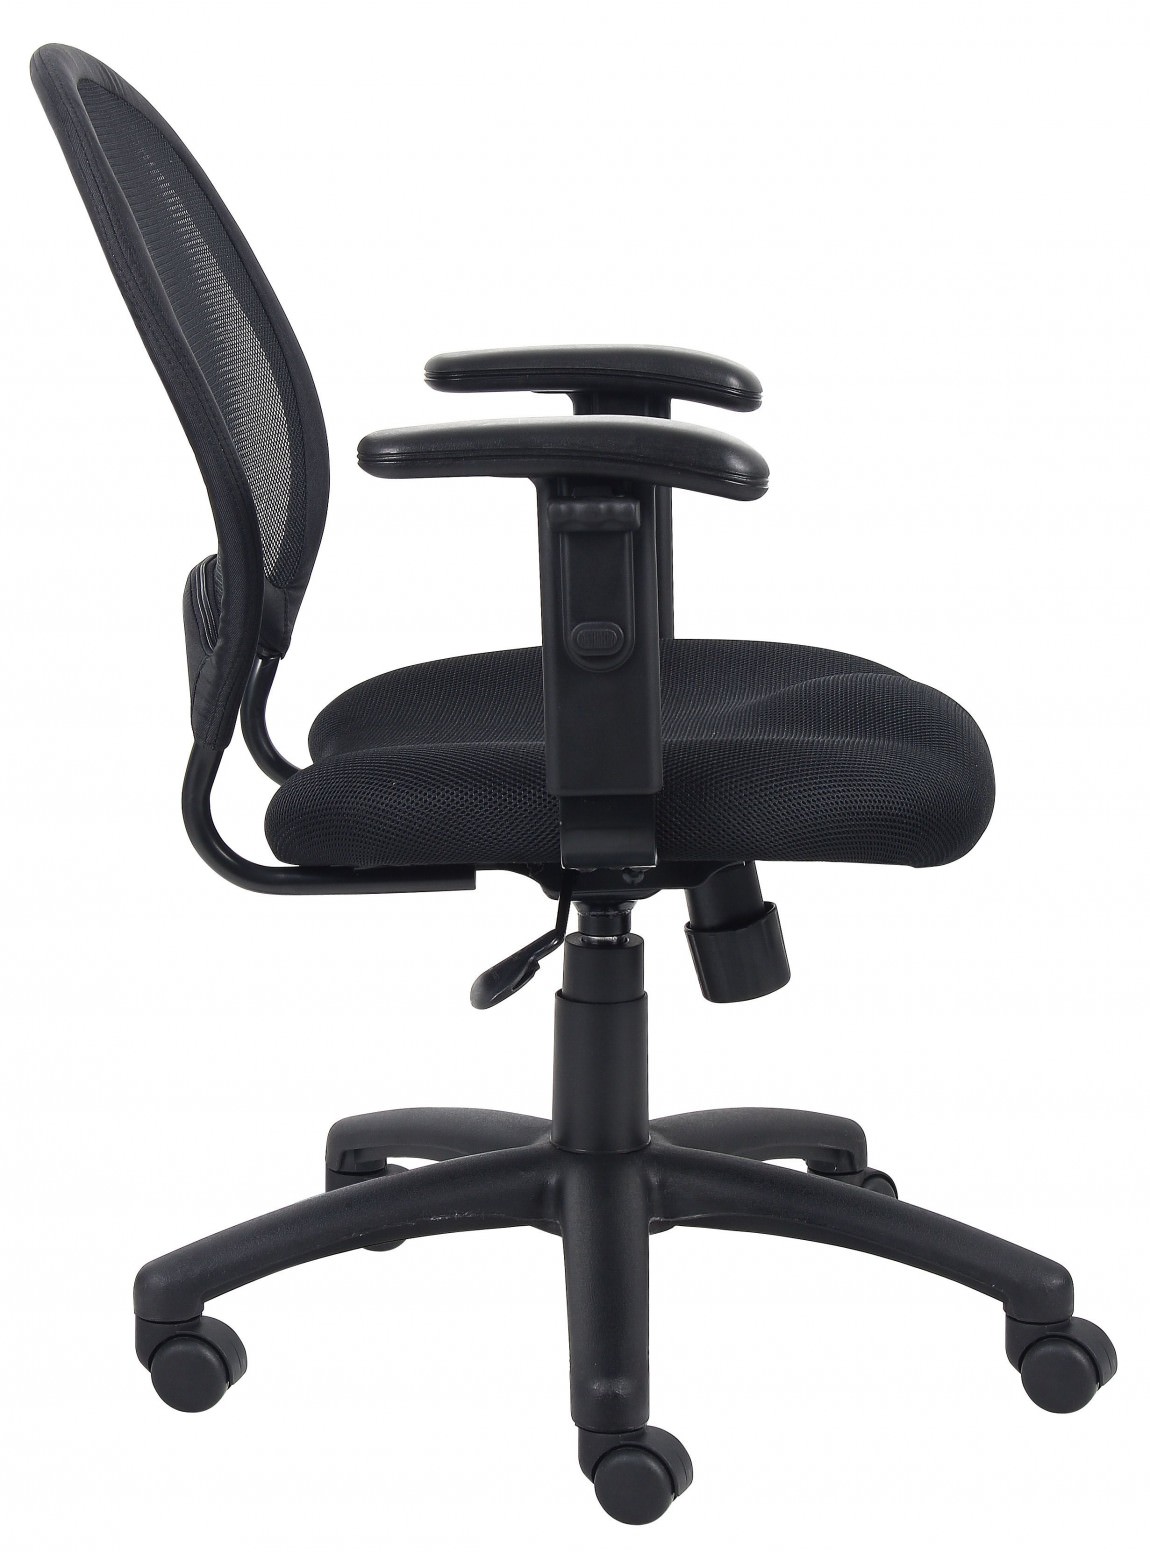 Mesh Back Office Chair with Arms